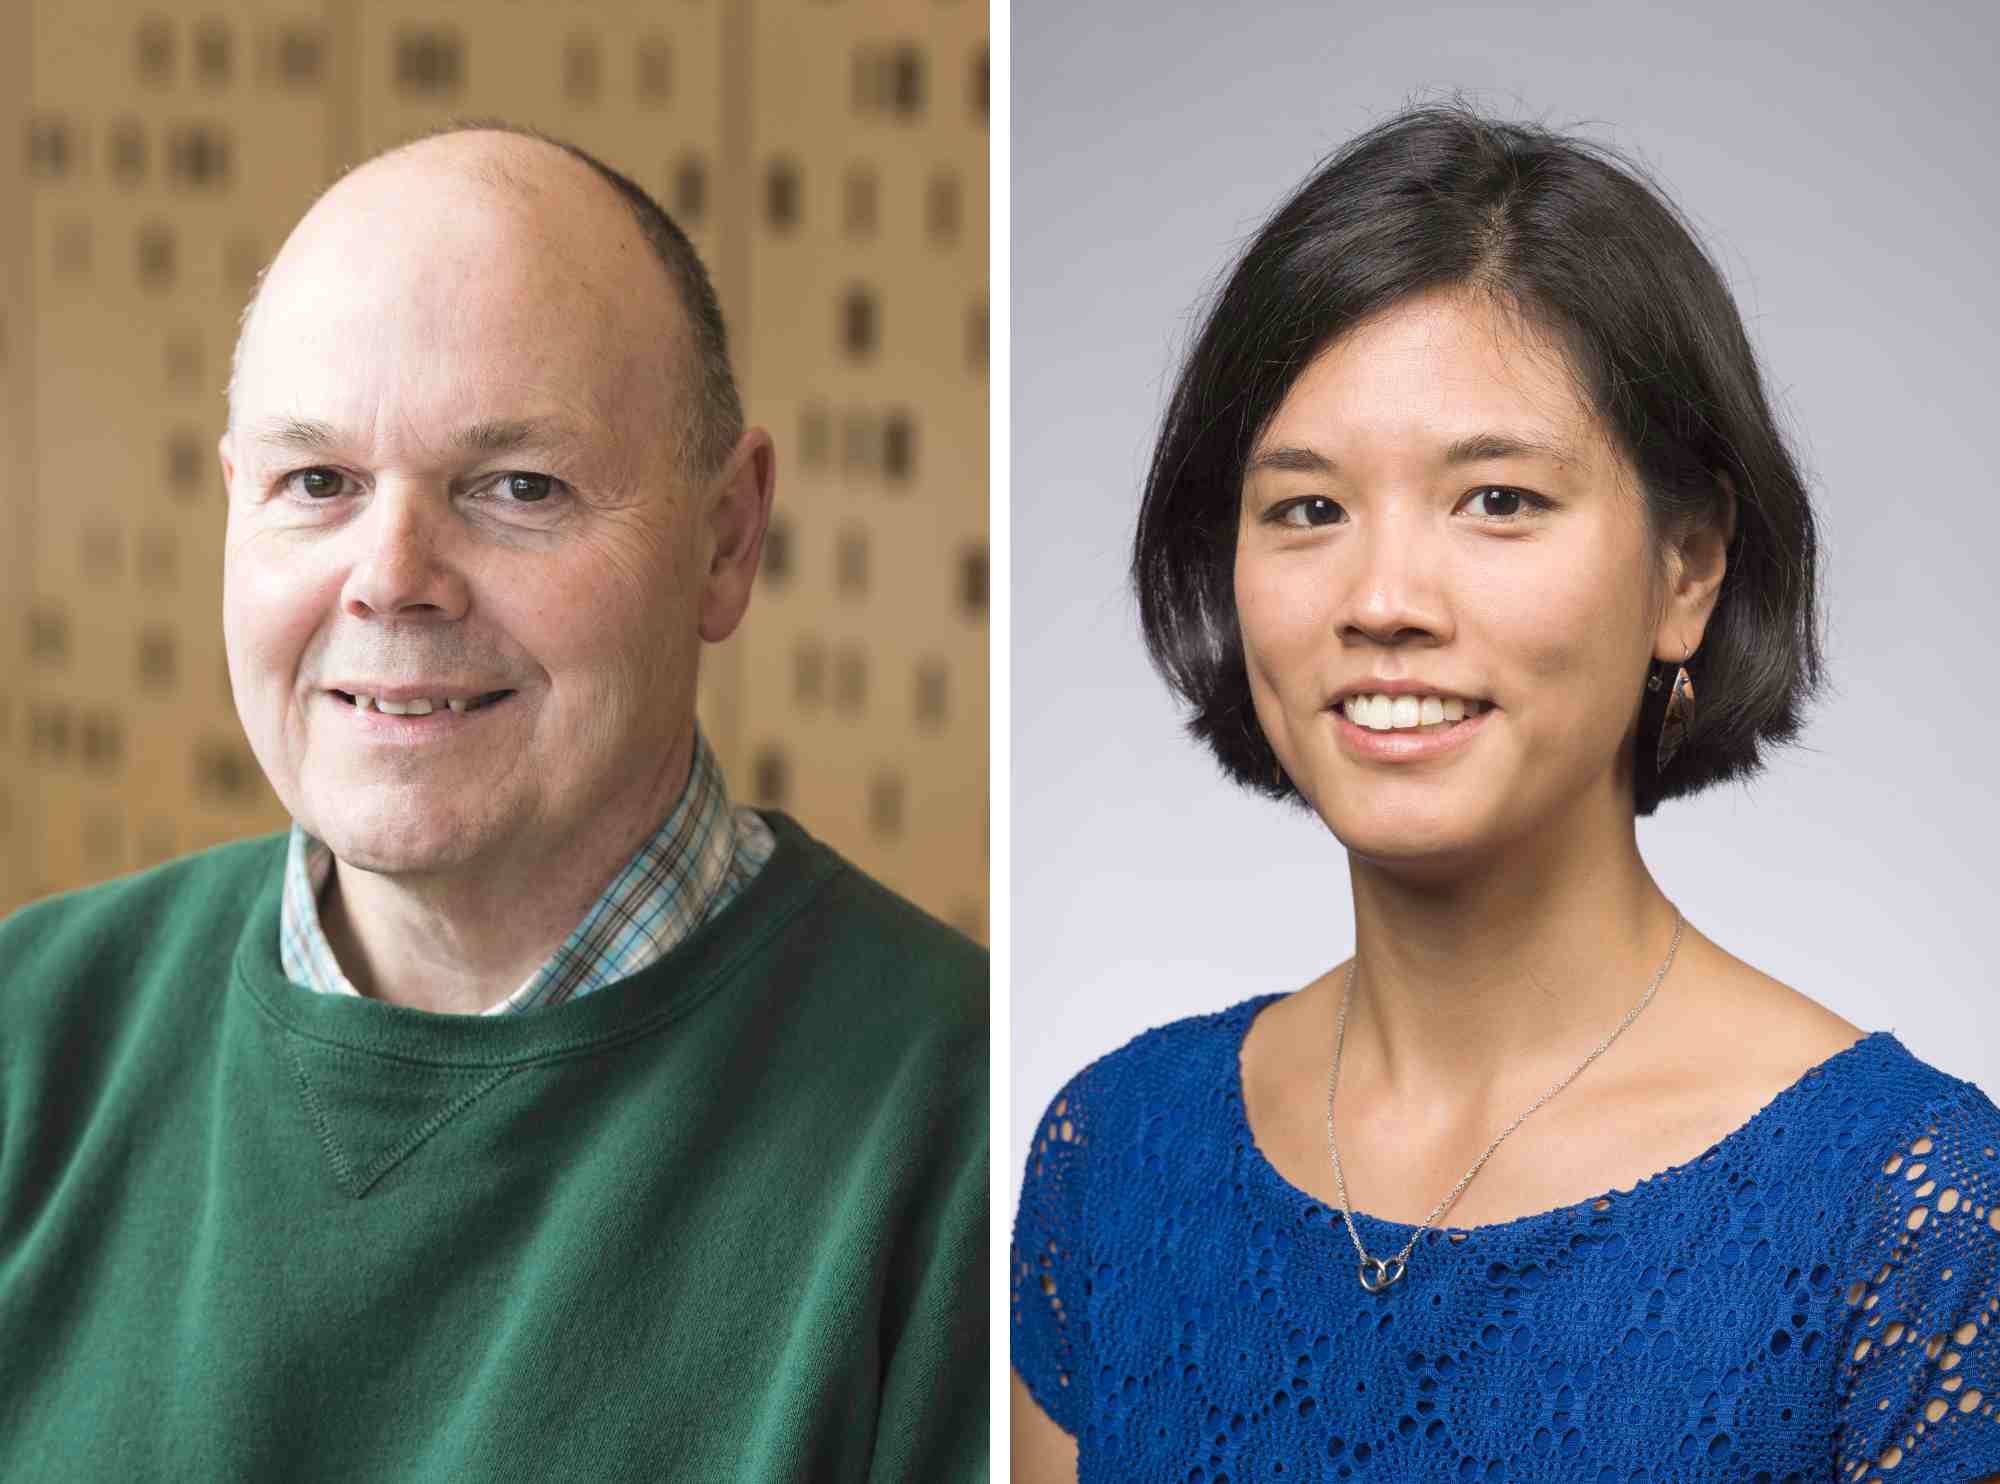 Diptych of two headshots featuring Mark Bocko and Jessica Shang.